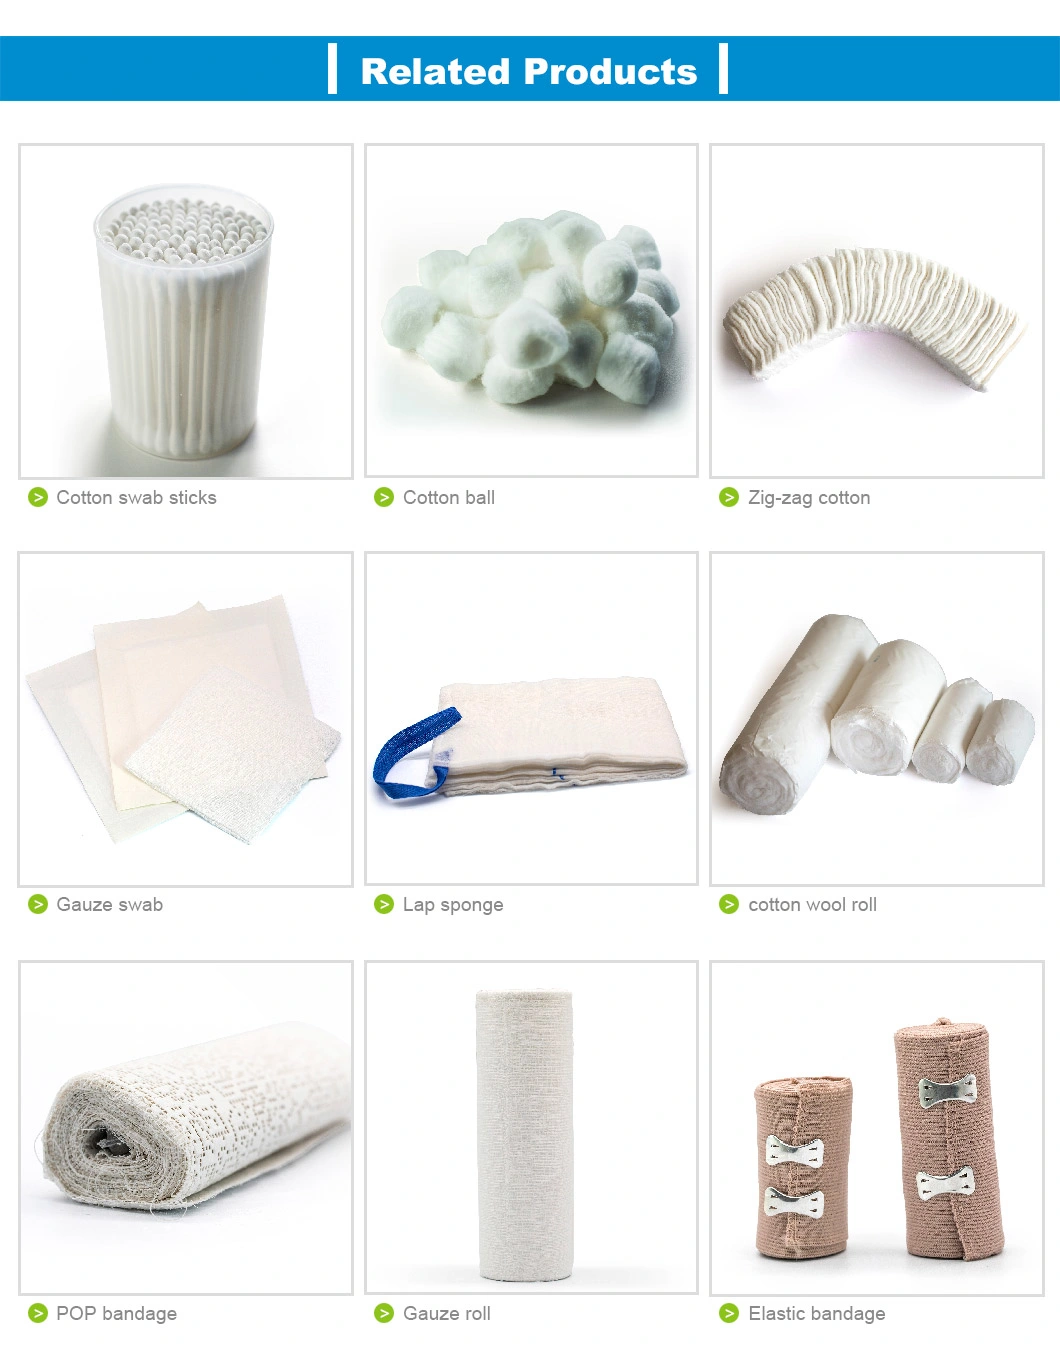 Hot Sale Orthopedic Fiberglass Casting Tape with Different Sizes